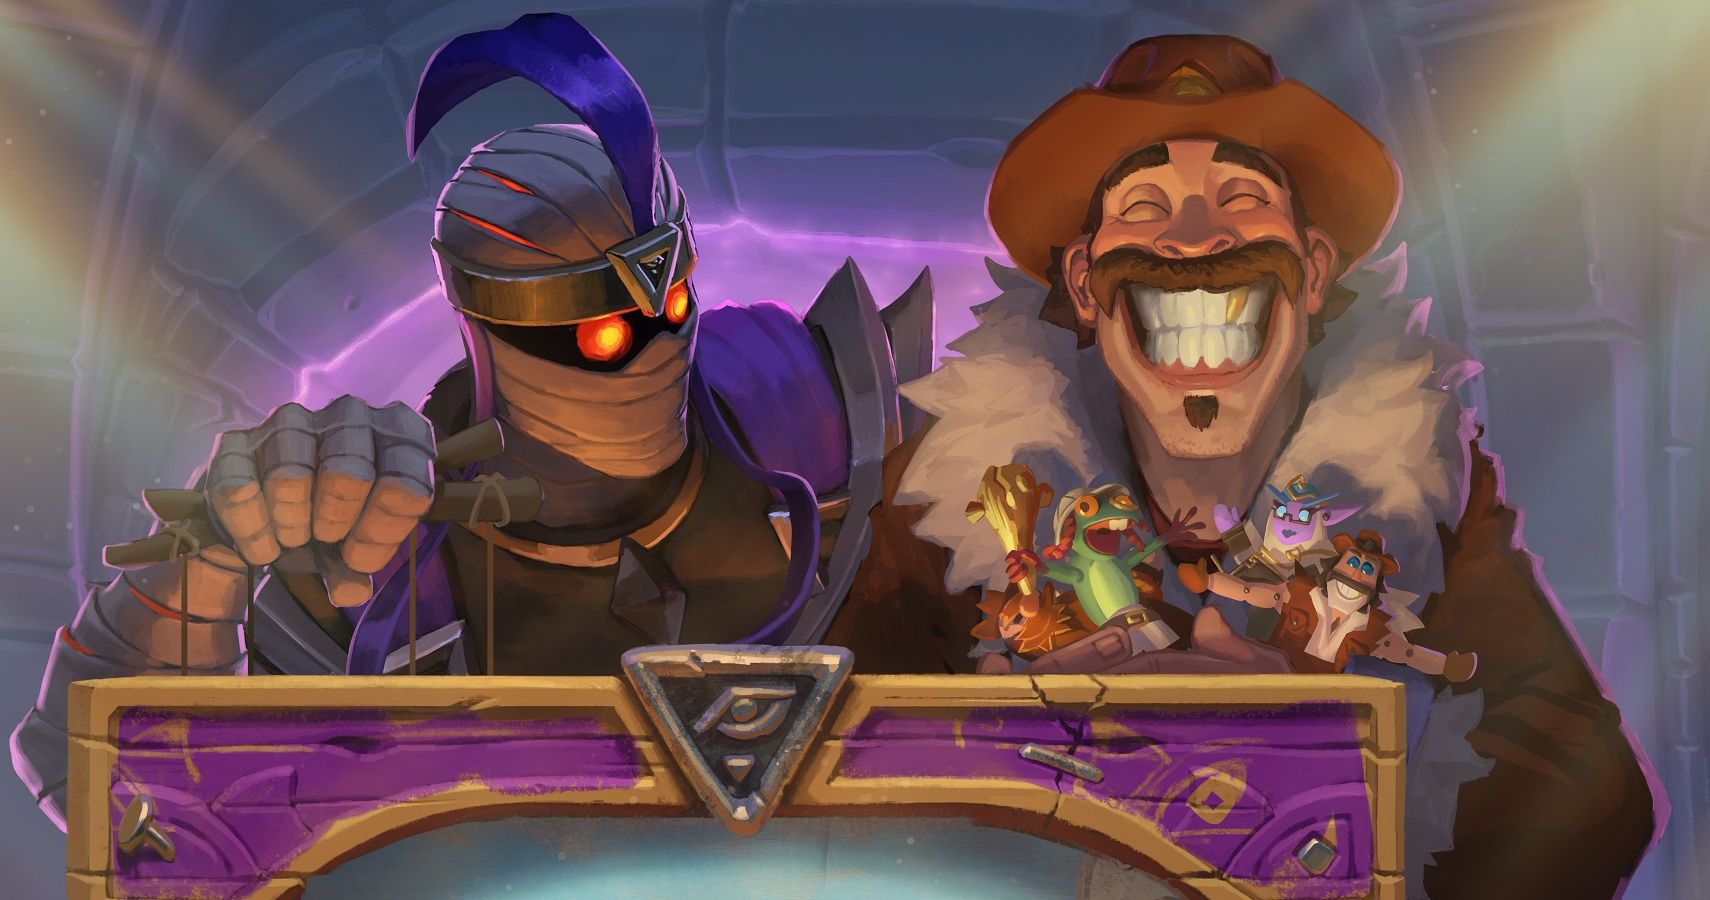 Blizzard Reveals Four New Hearthstone Cards Ahead Of Upcoming Solo Adventure